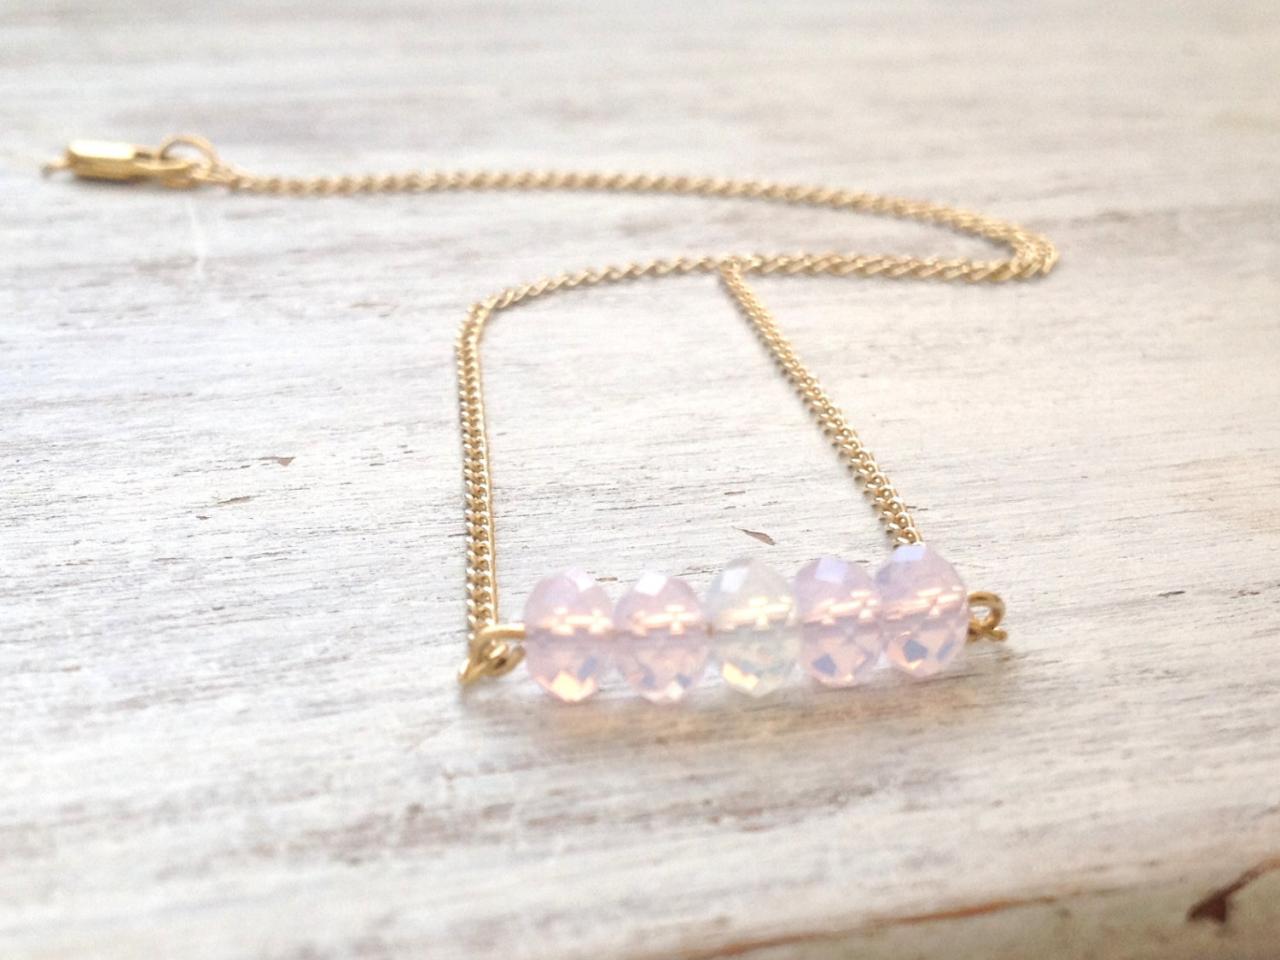 Gold Necklace, Delicate Necklace, Gold Pink Necklace, Beaded Necklace,1 Gold And Pink - A501